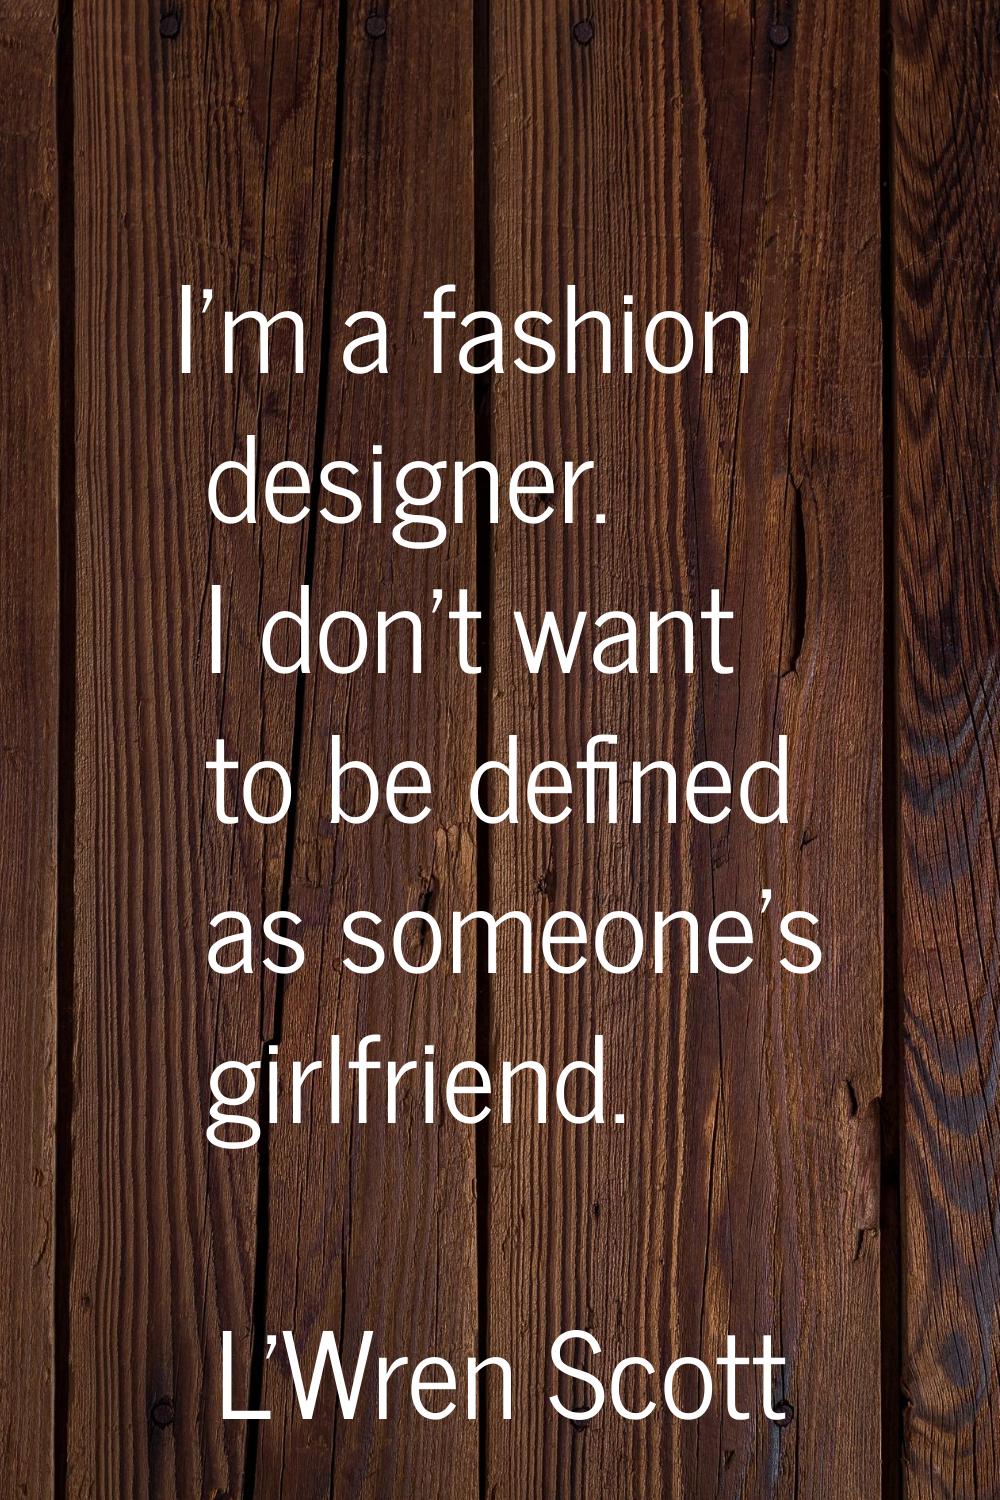 I'm a fashion designer. I don't want to be defined as someone's girlfriend.